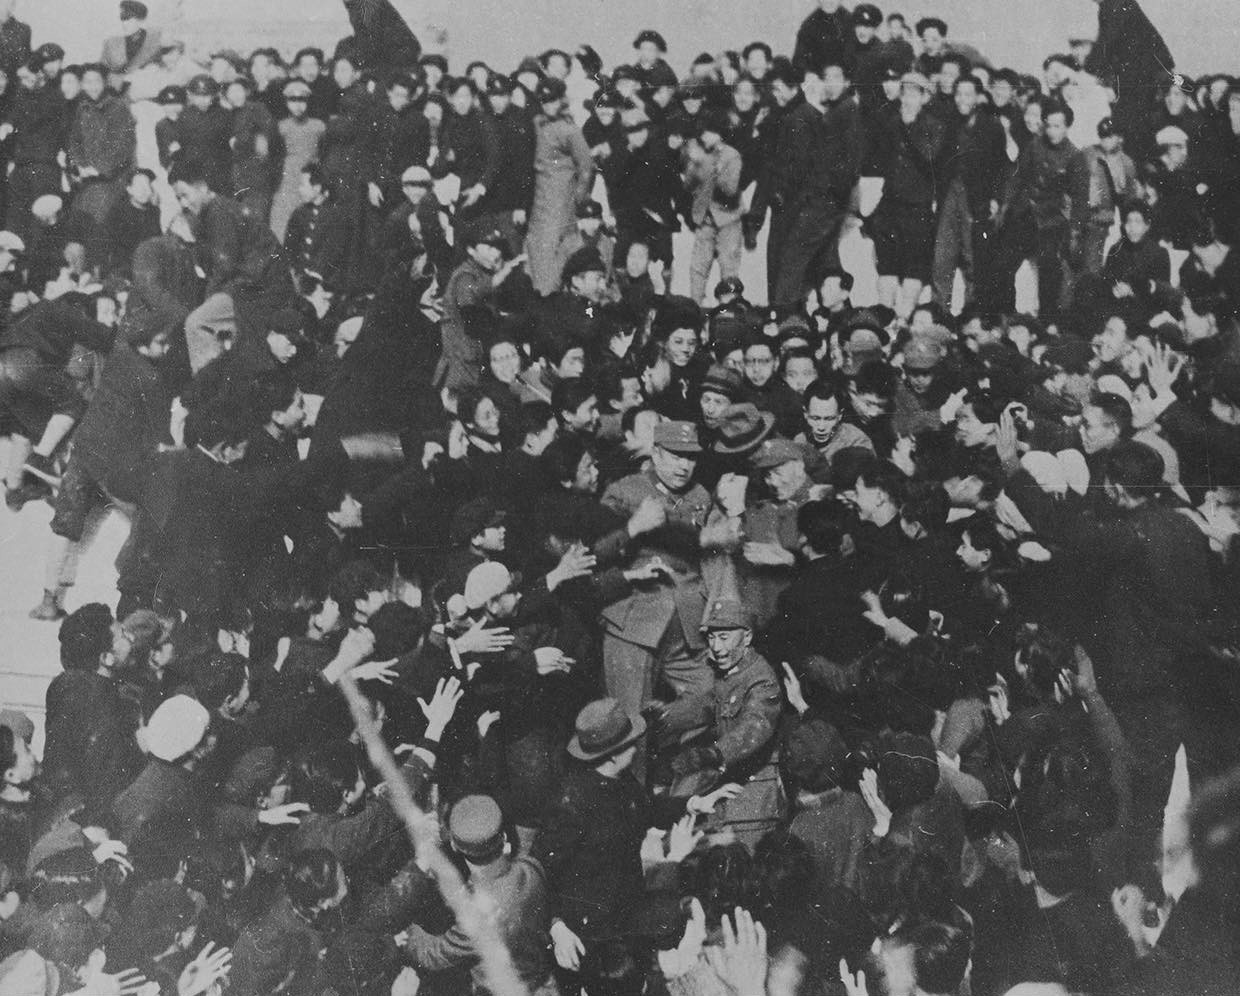 Students eager to shake hands with Chiang Kaishek after Chiang had given a speech, Hall of Supreme Harmony, Forbidden City, Beiping, China, 15 Dec 1945; note General Huang Renlin and bodyguard Qian Shushi